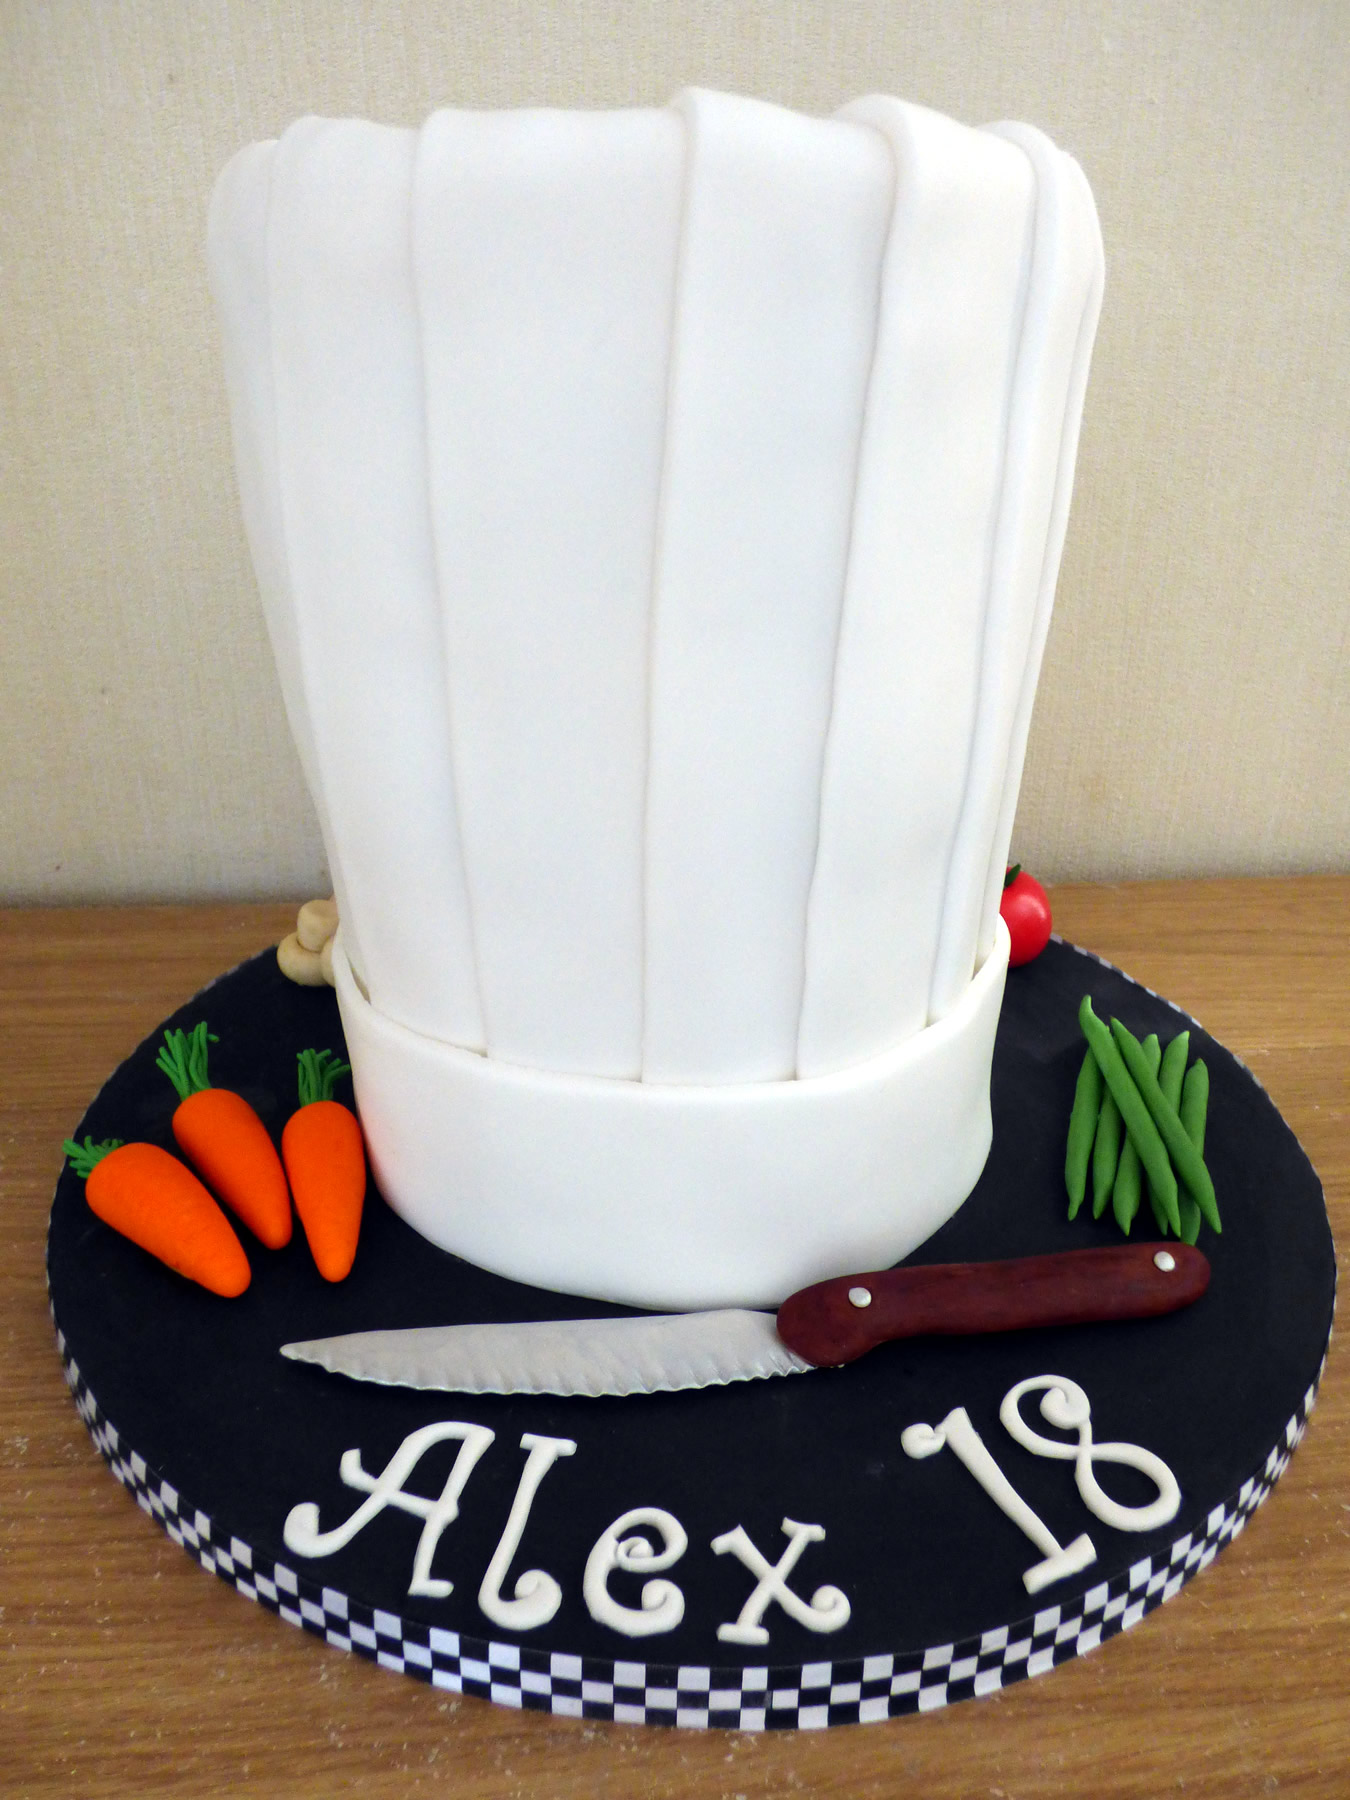 Chef Inspired Novelty Cake | Susie's Cakes